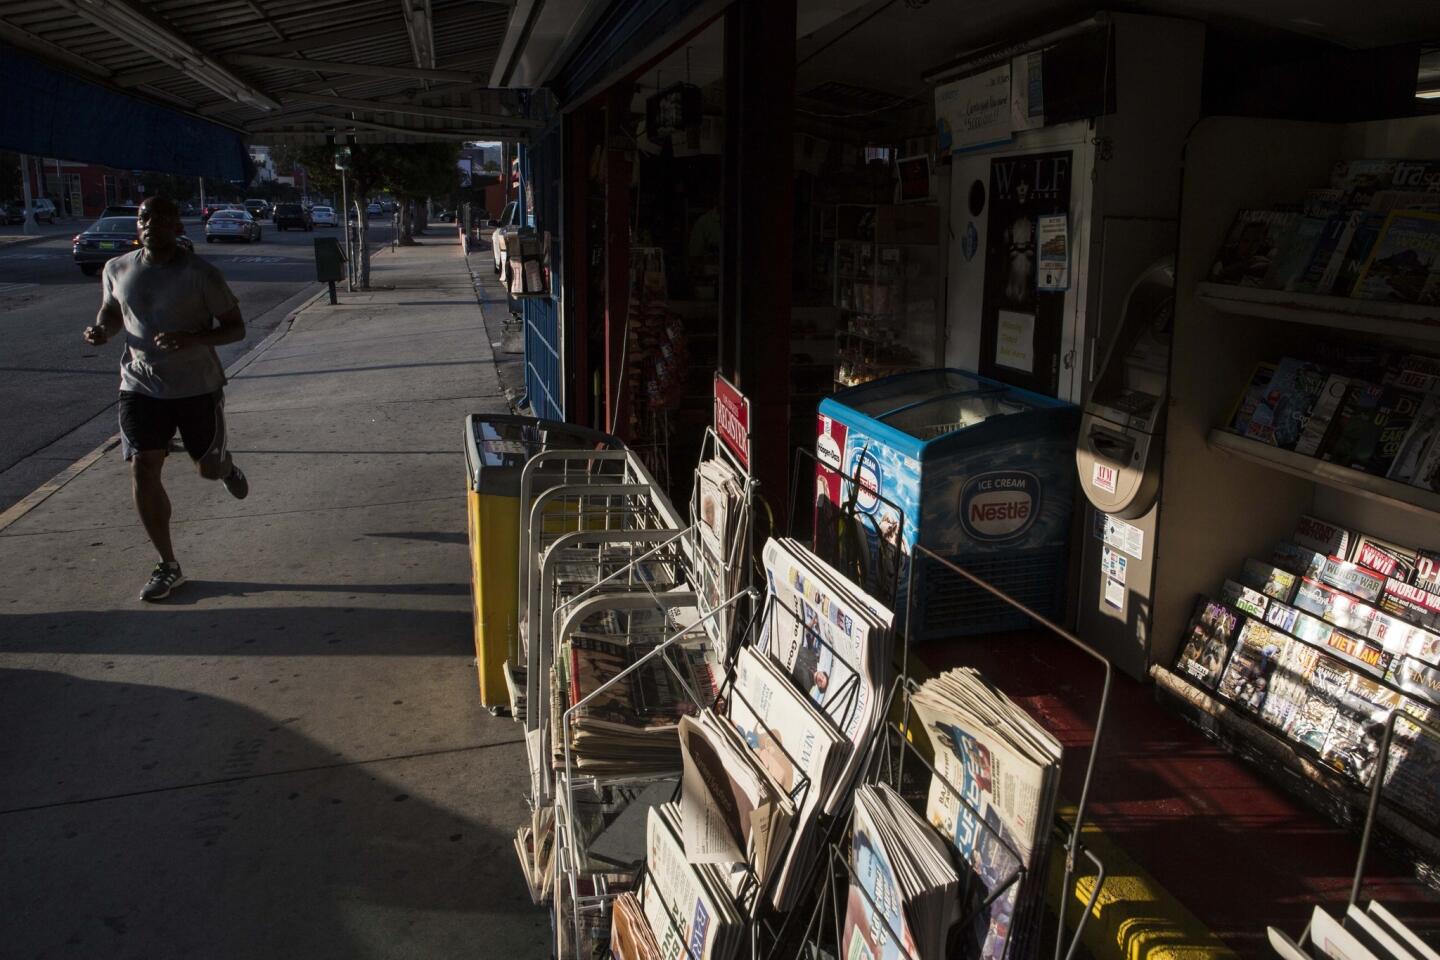 A man jogs past Centerfold International Newsstand on Fairfax Avenue in Los Angeles. With several out-of-state newspapers and more than 400 magazines to choose from, including four about wristwatches, Centerfold has managed to survive in a city full of shuttered newsstands.